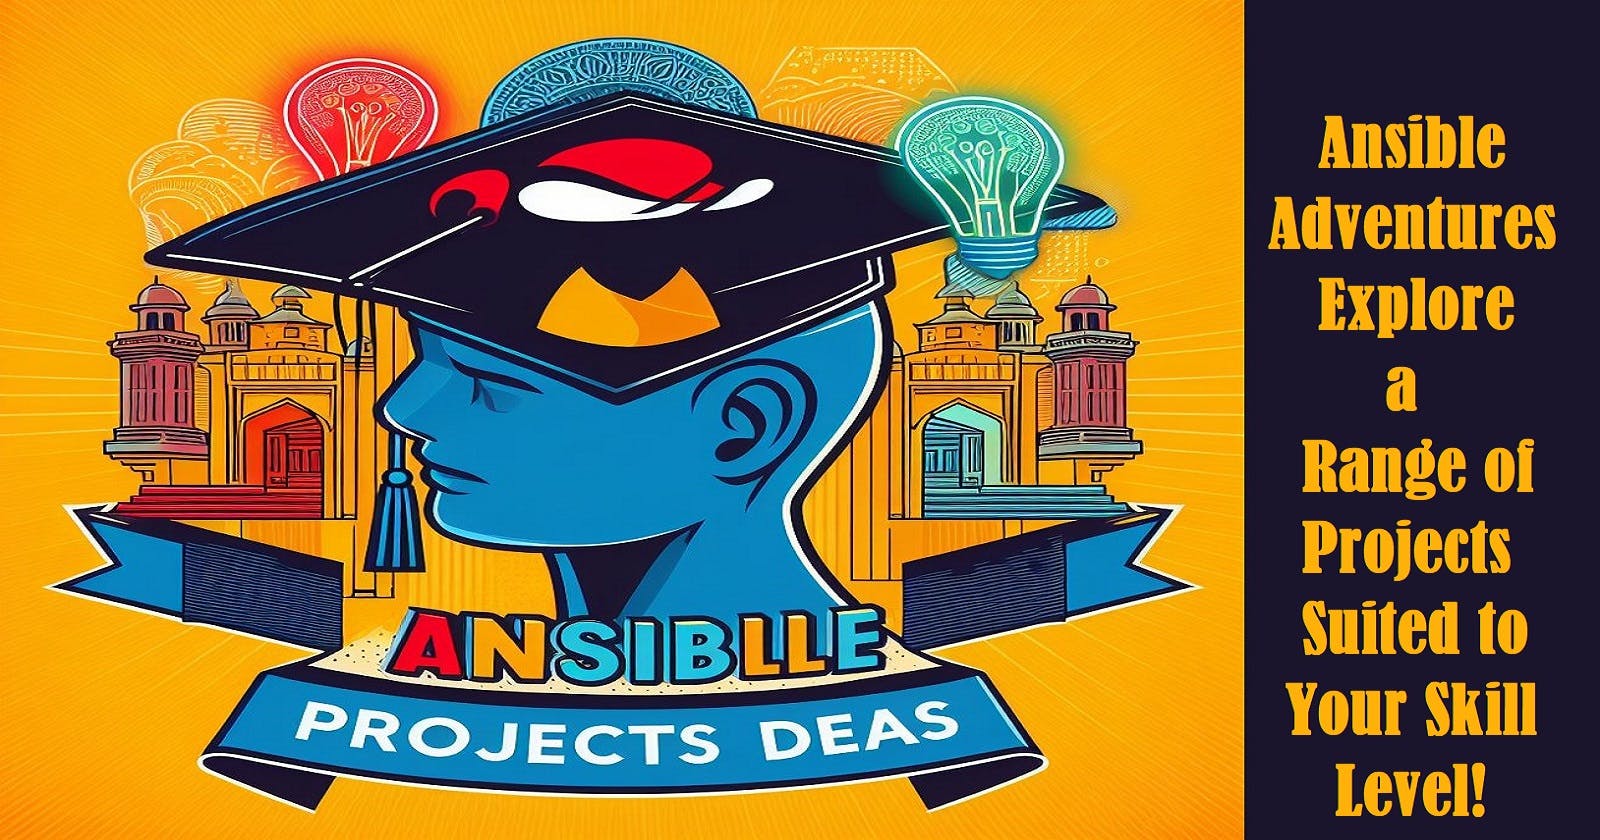 Ansible Adventures: Explore a Range of Projects Suited to Your Skill Level!